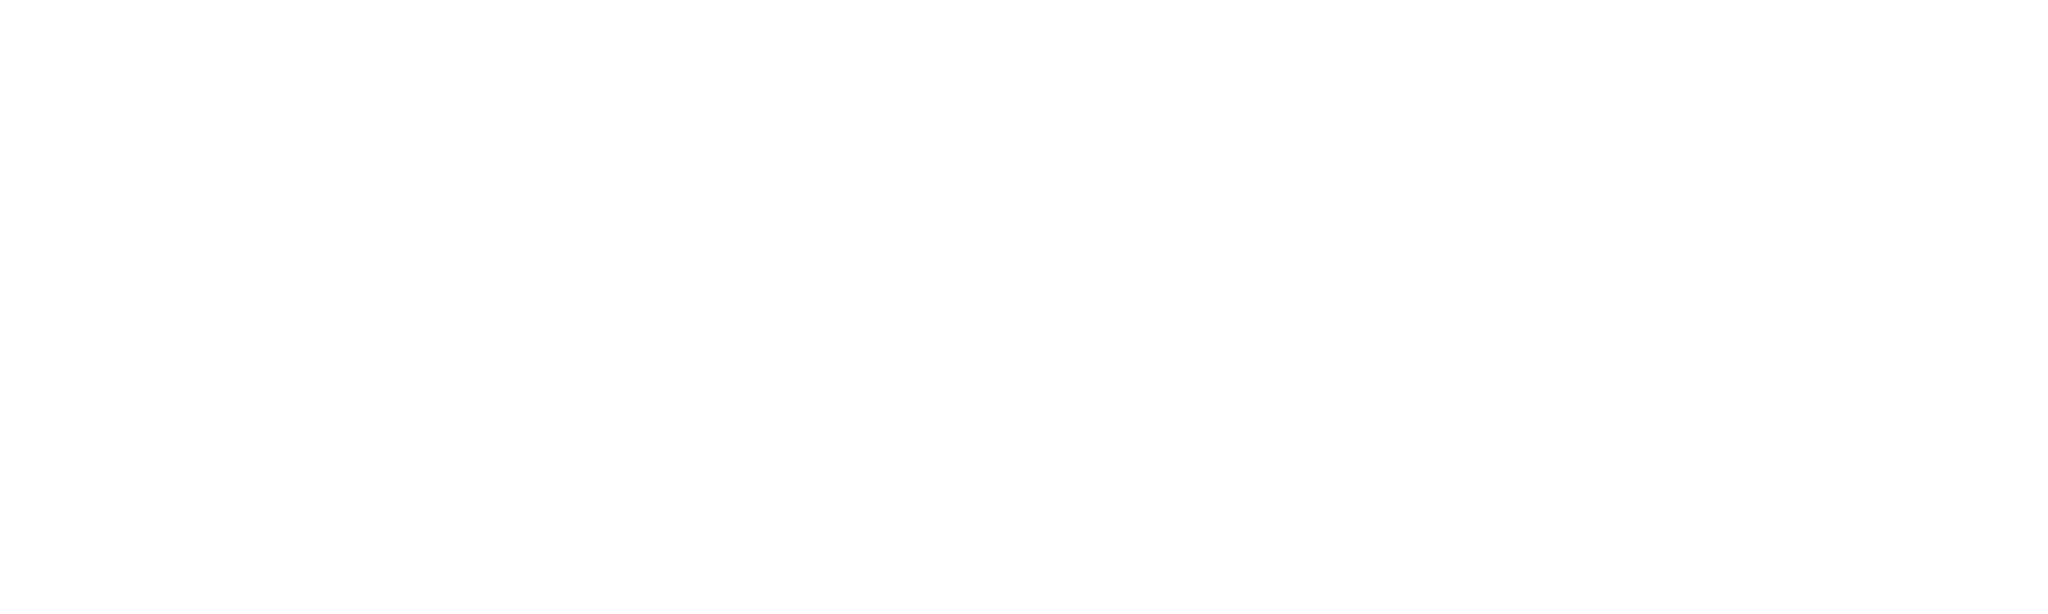 Ace of Gnomes